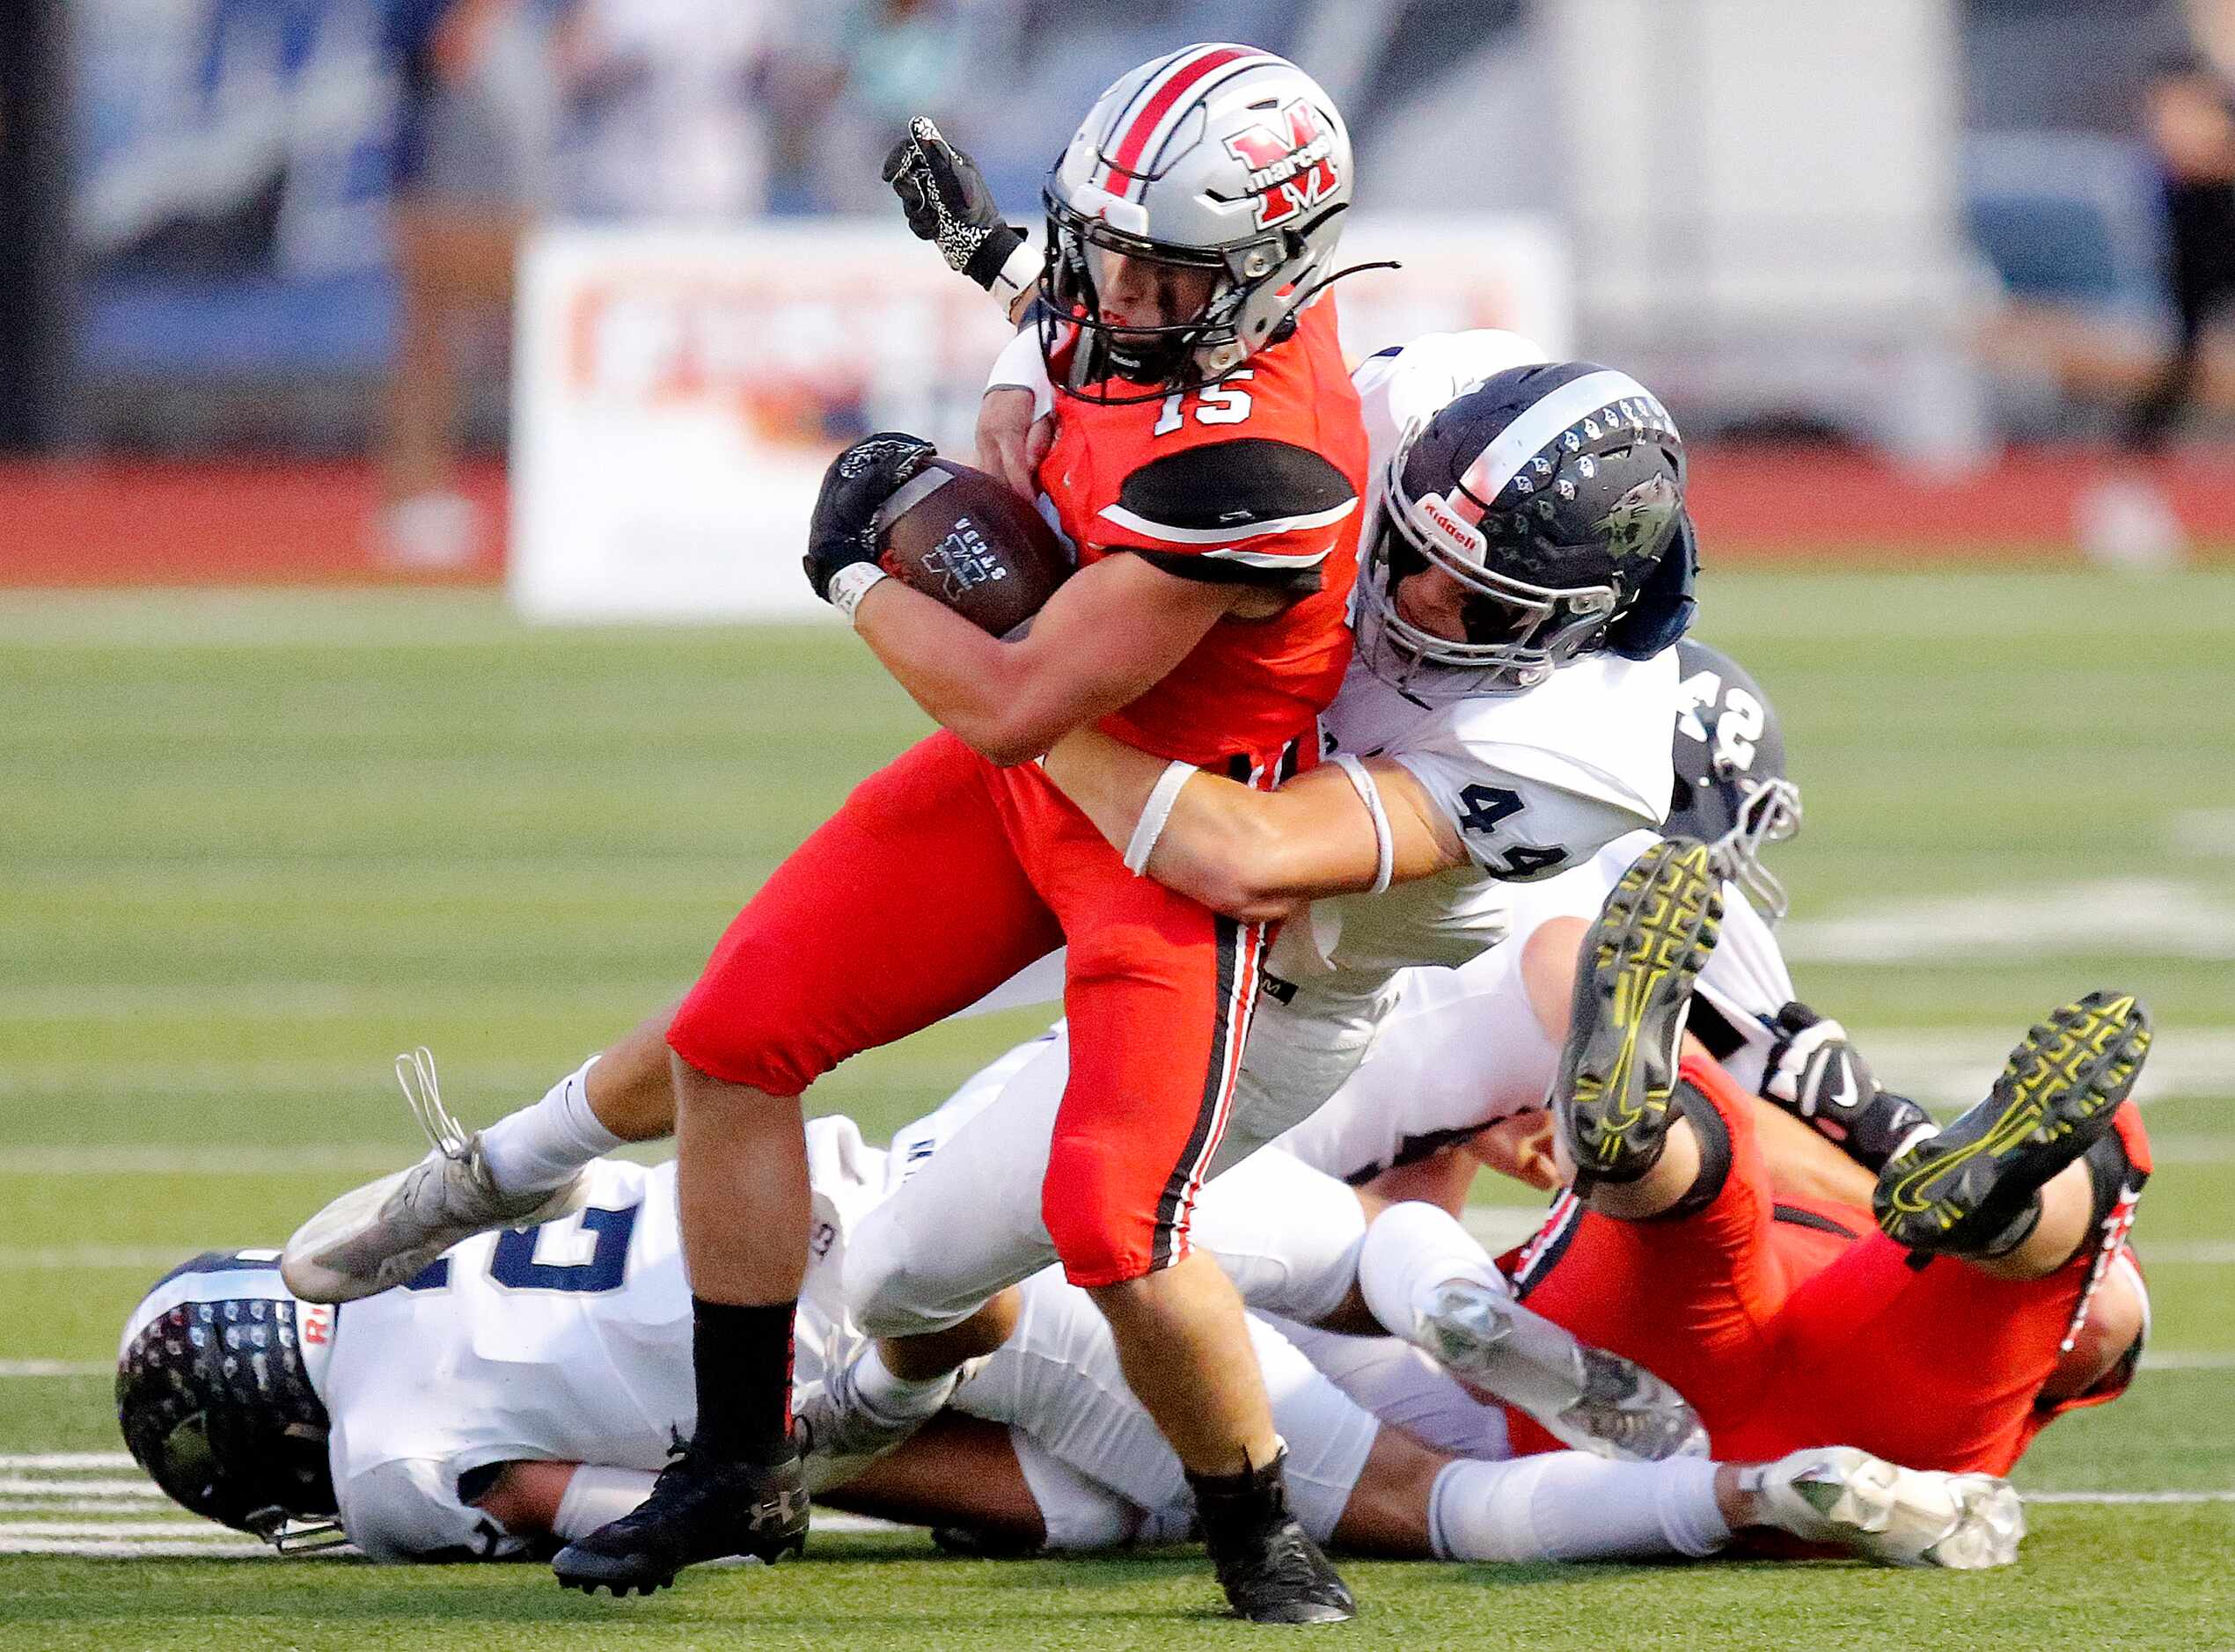 Flower Mound Marcus High School running back Gabe Espinoza (15) is brought down by Flower...